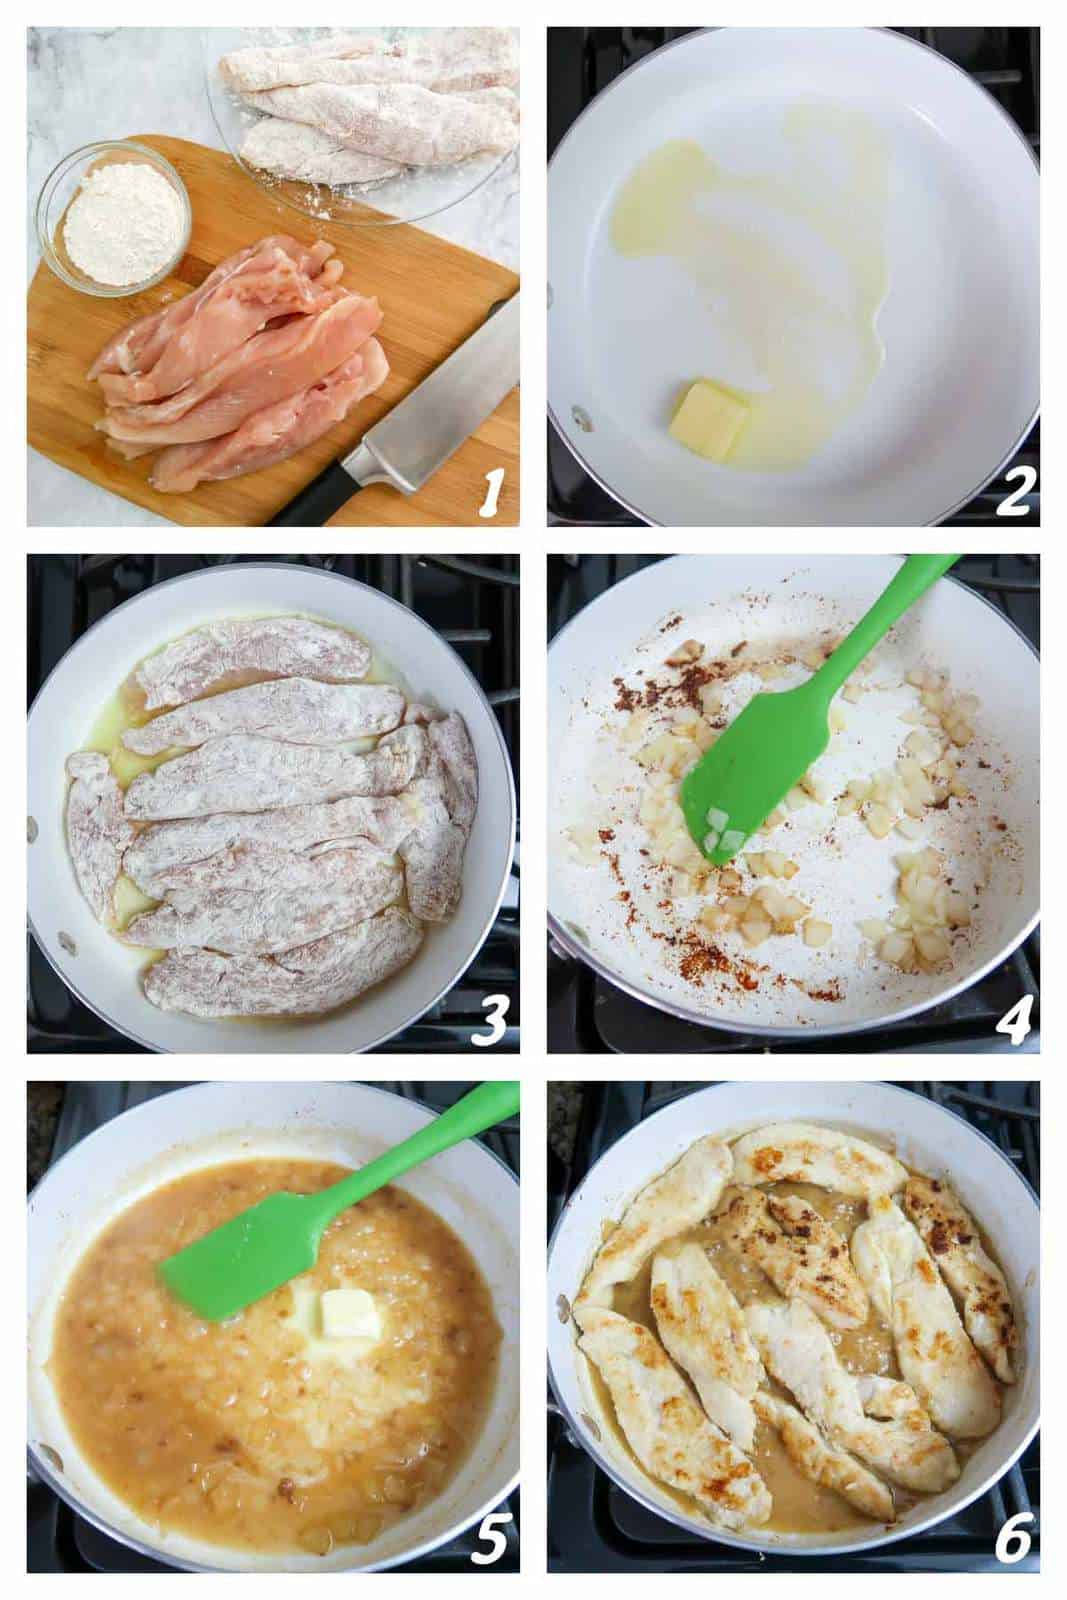 Six panel grid of process shots- breading chicken, combining ingredients in a pan, and cooking the chicken.